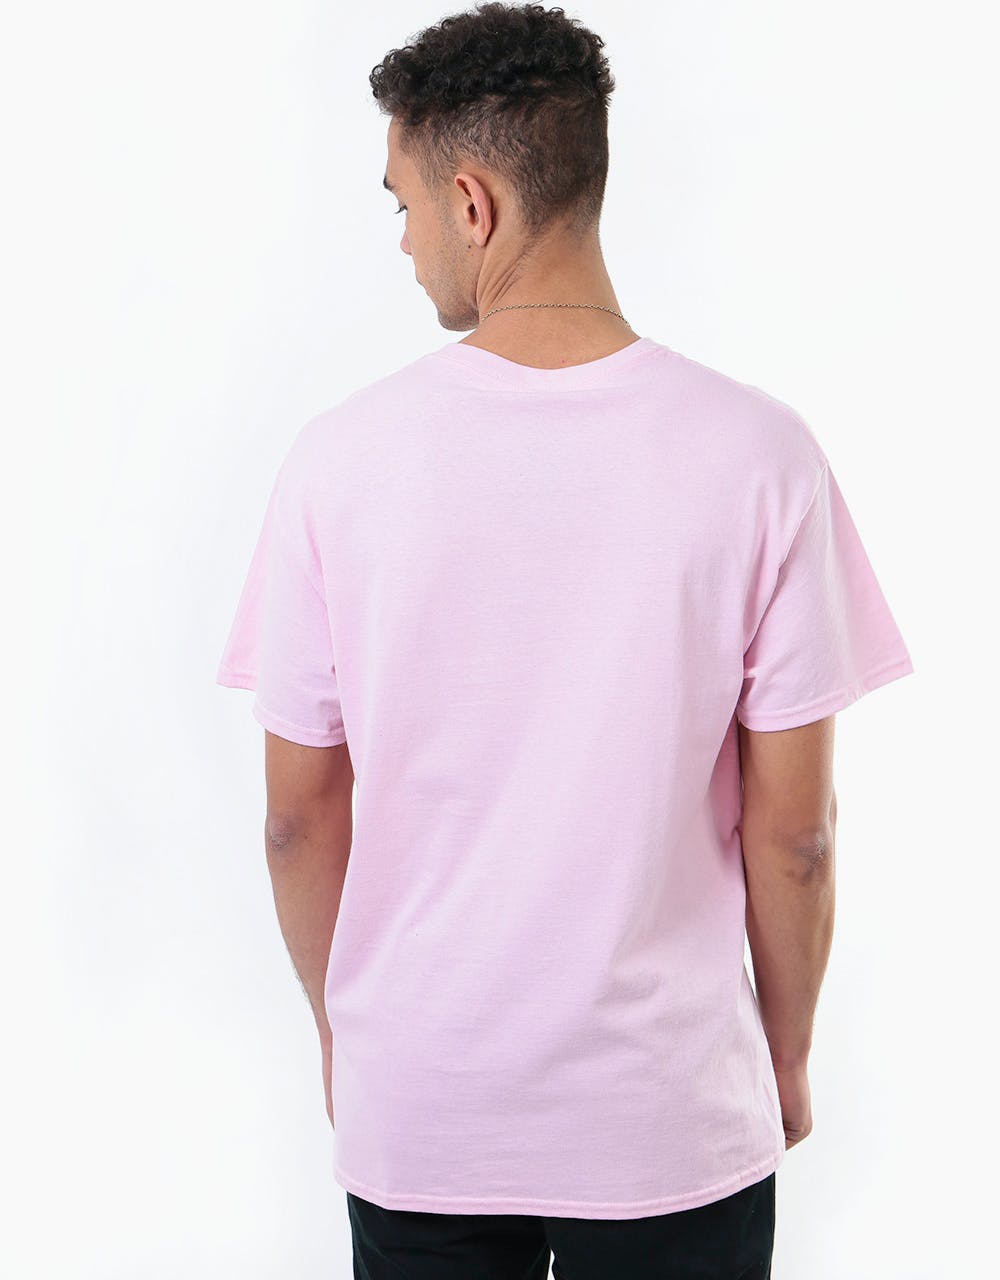 Route One Cupid T-Shirt - Light Pink